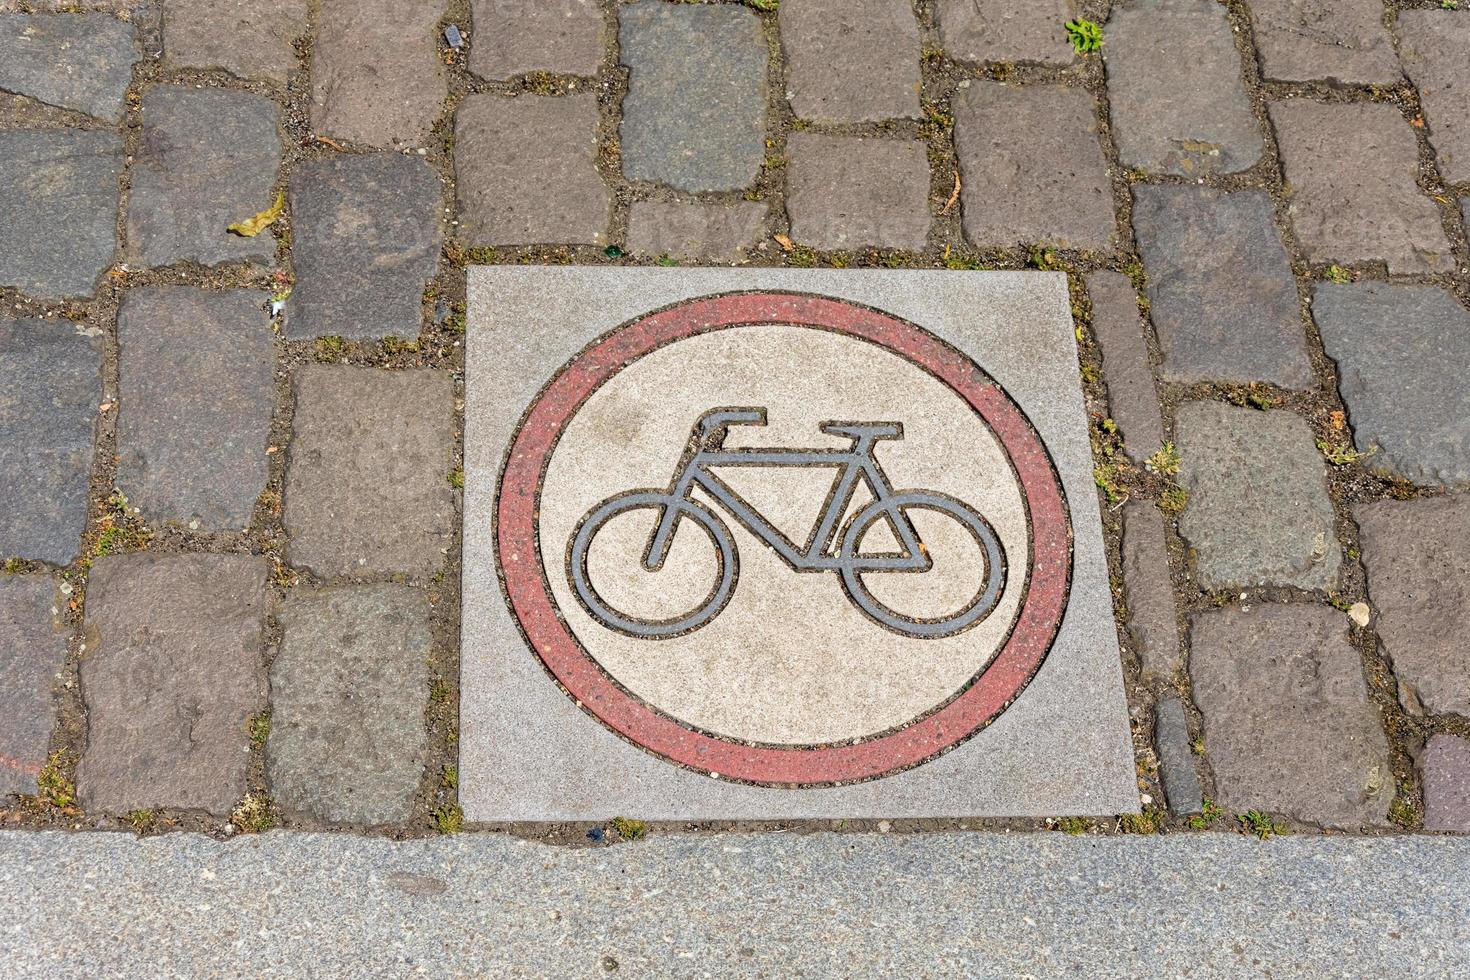 symbol on paving stones forbidden for bicycles photo